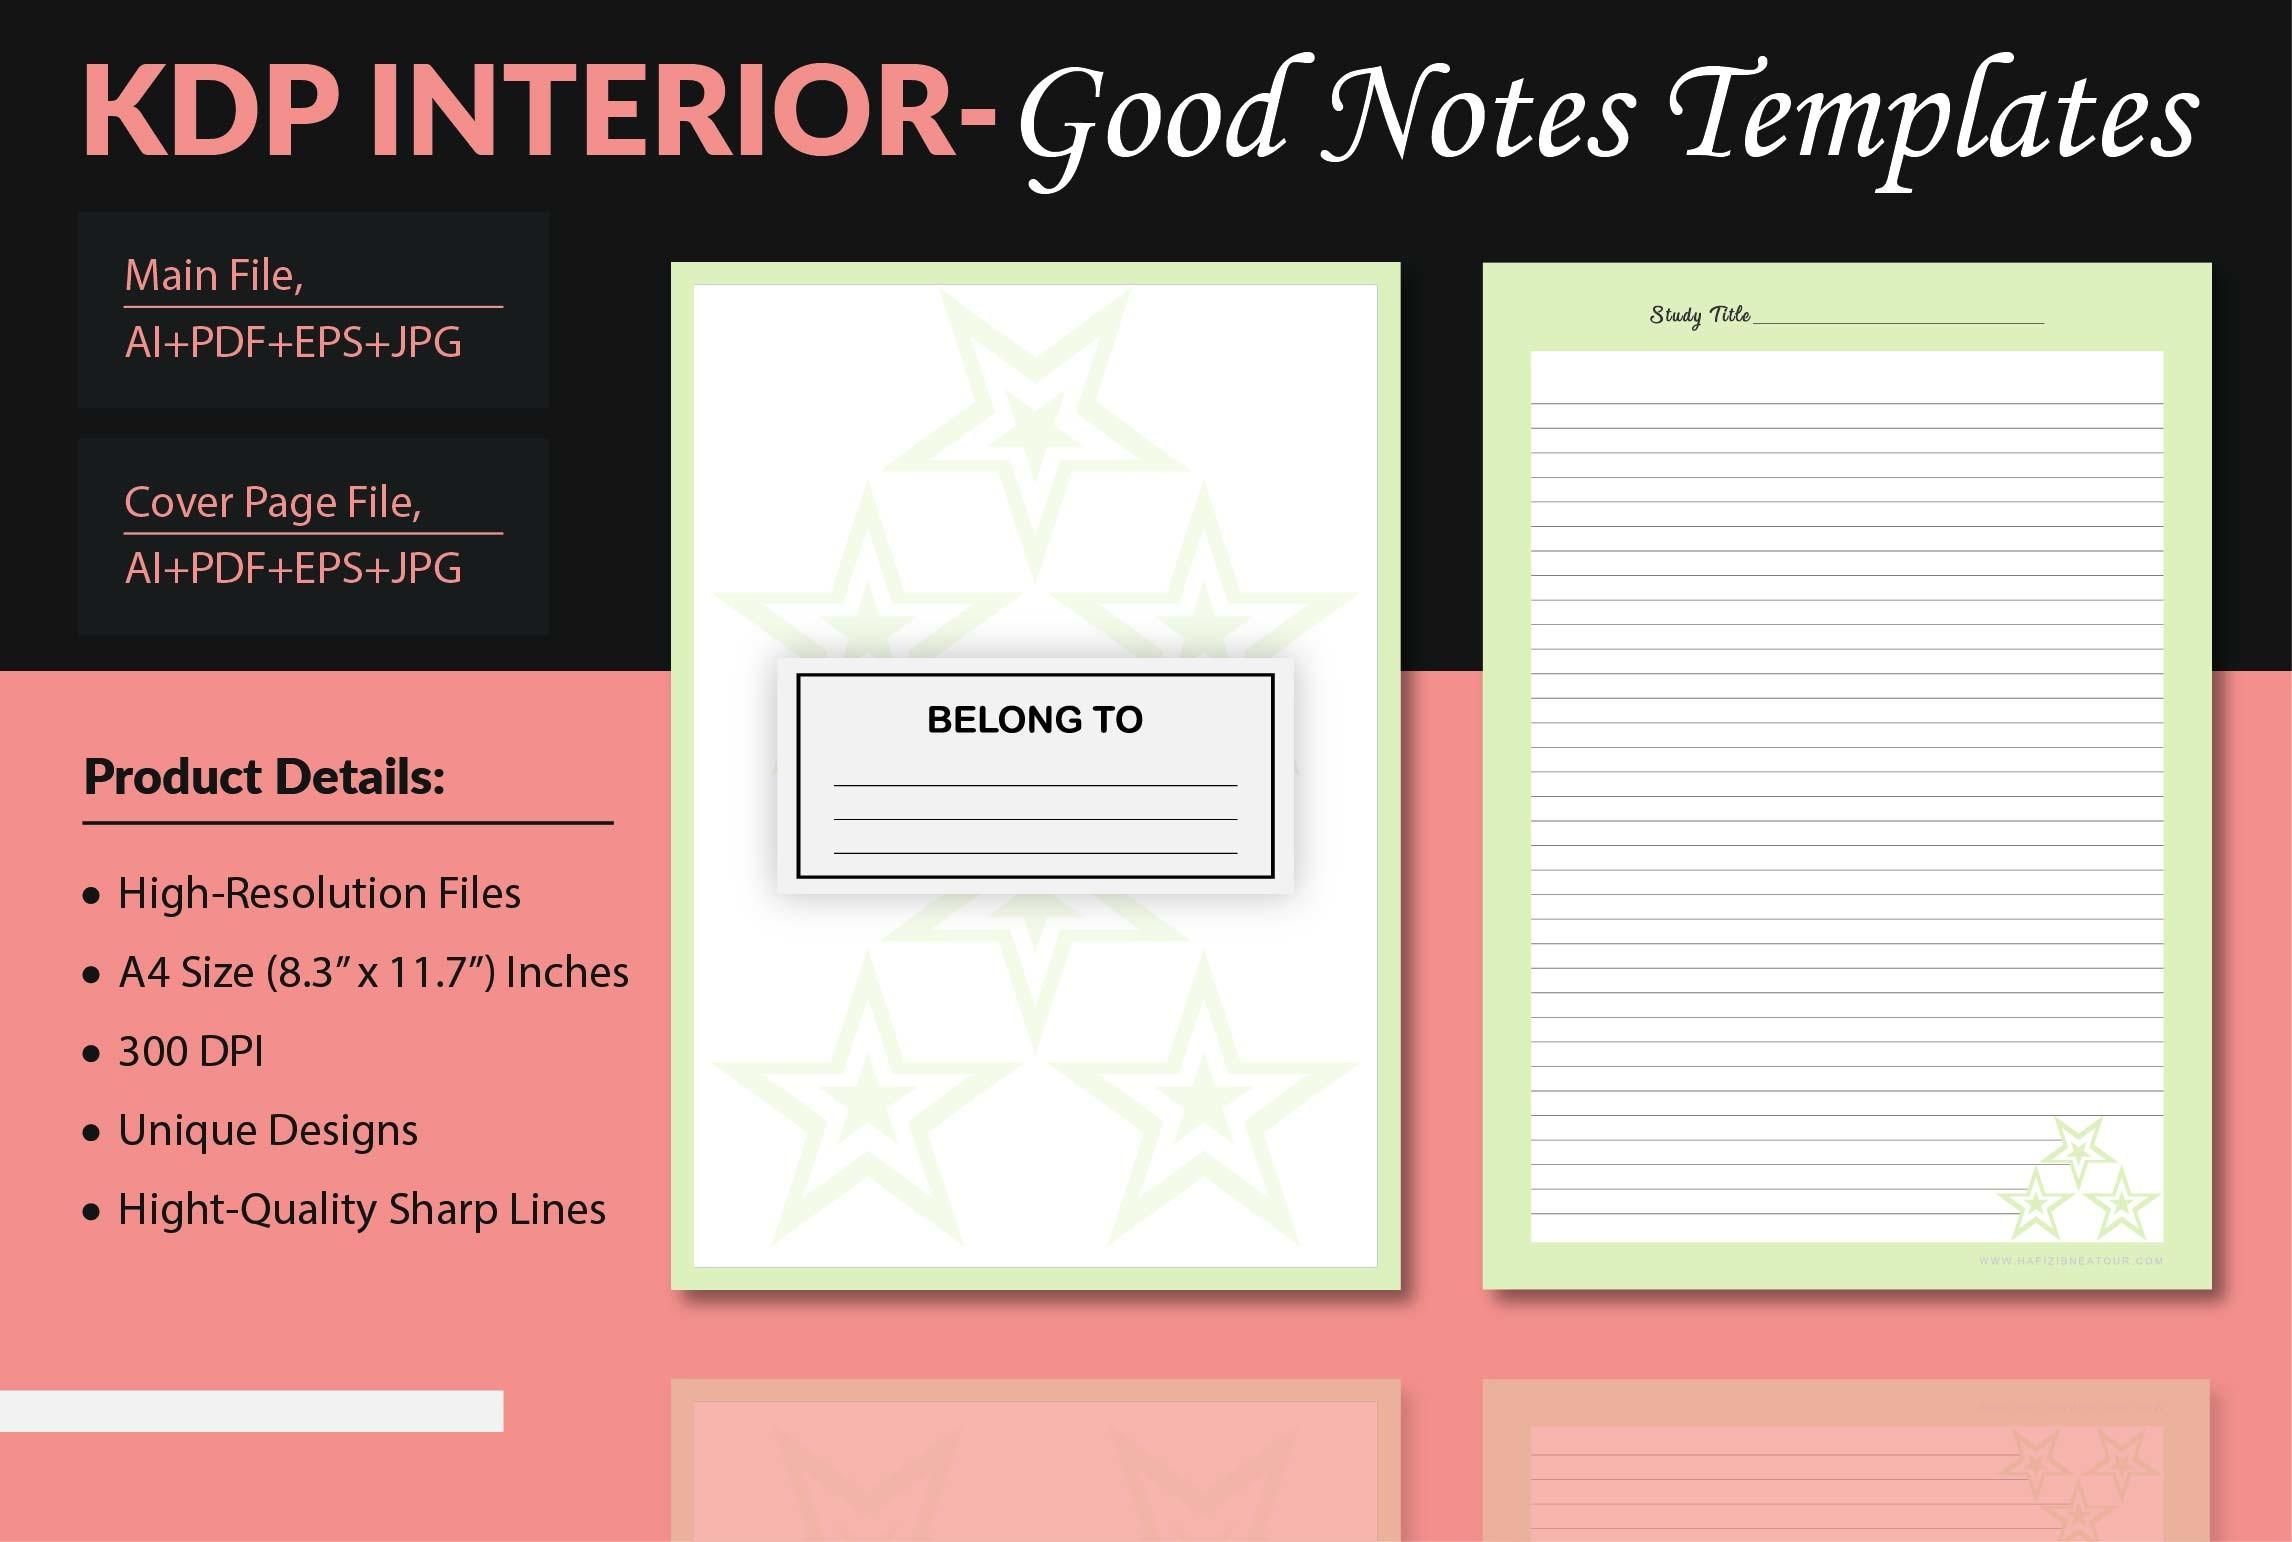 Good Note Templates